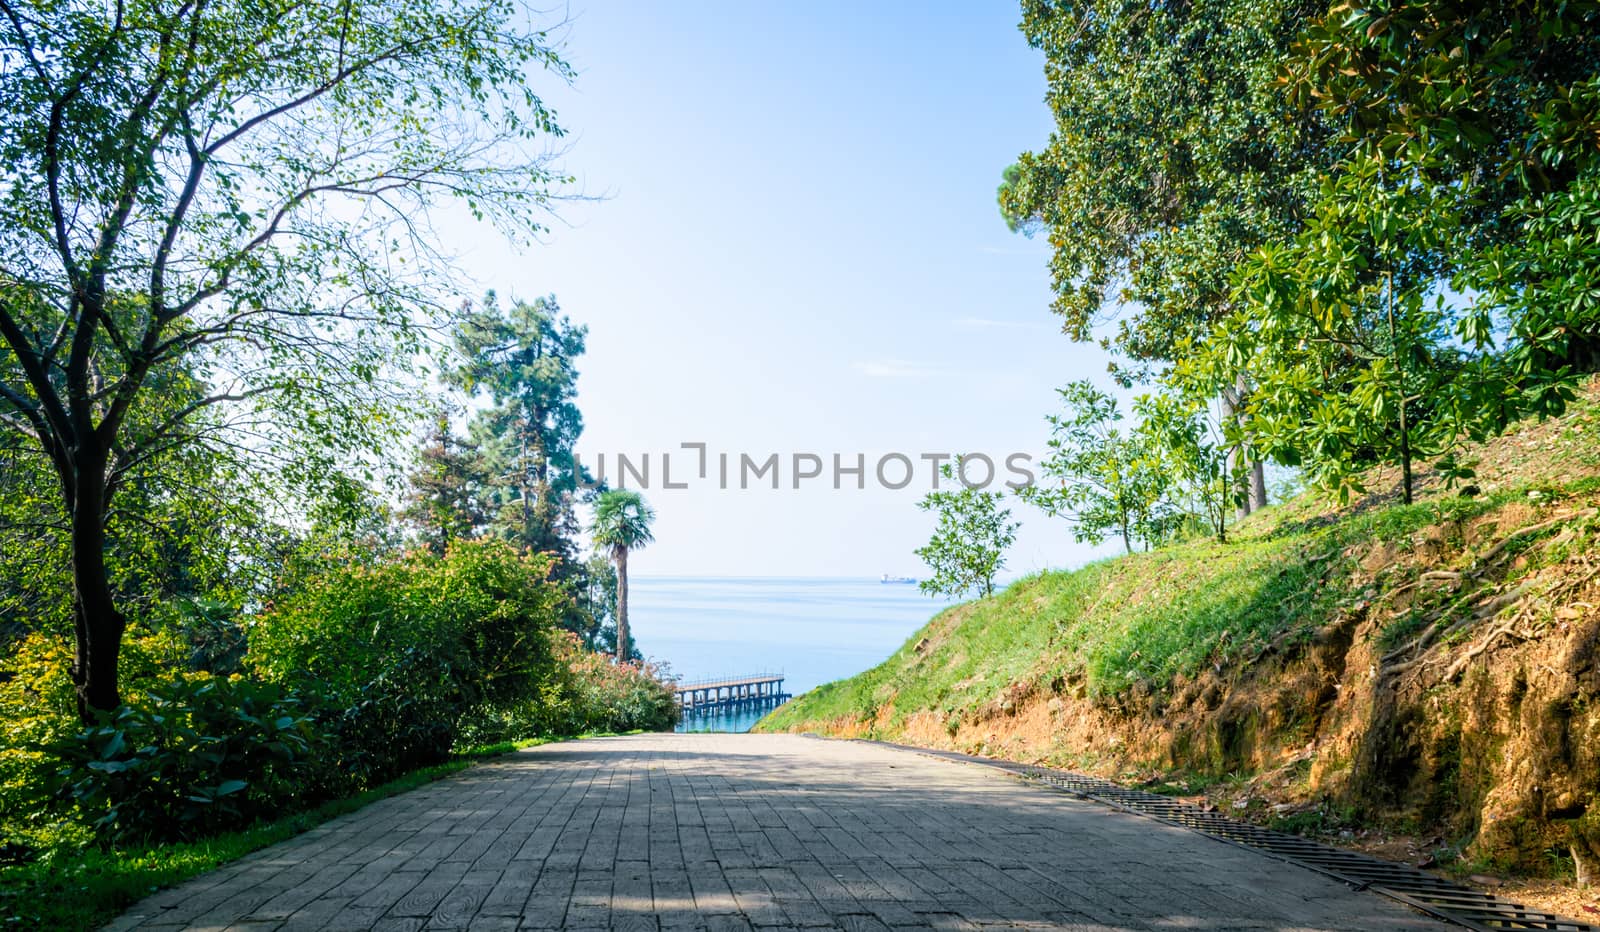 descent road in a park overlooking the sea in Georgia by Gera8th